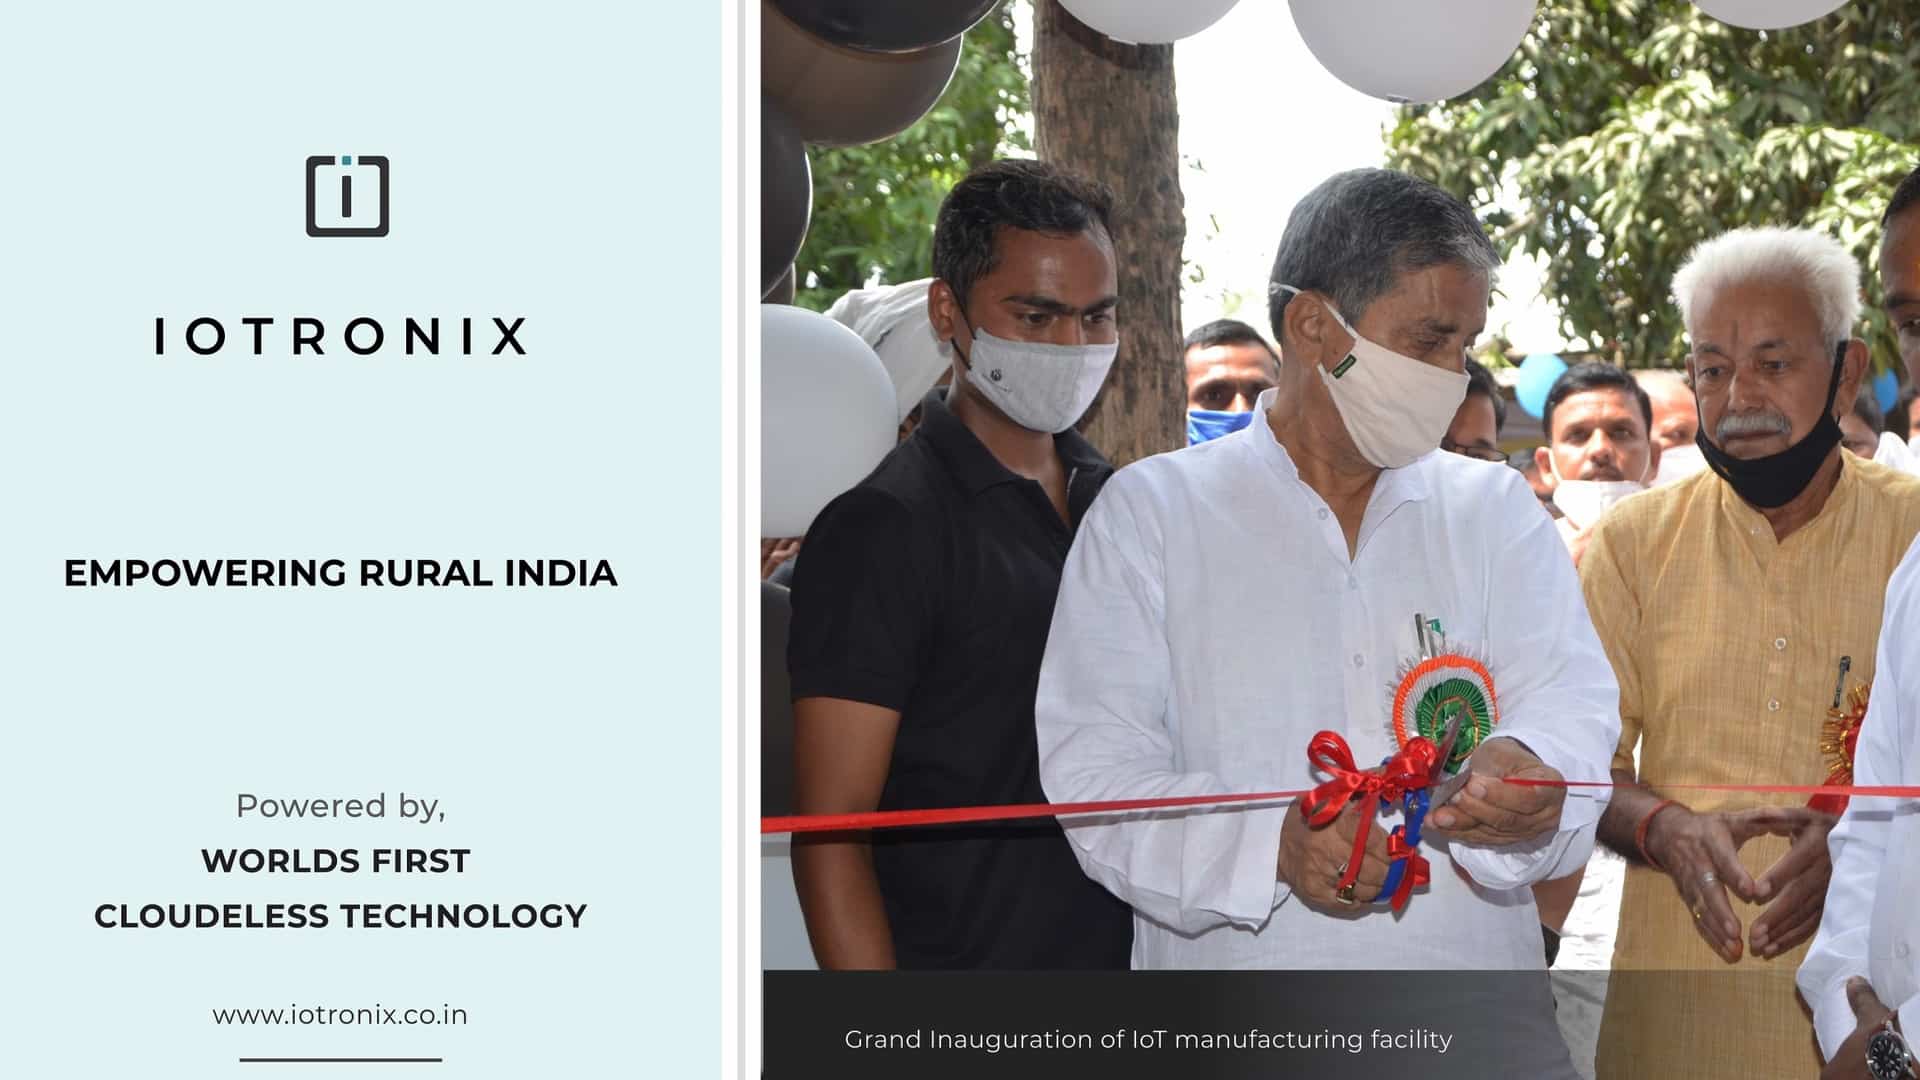 To boost #MakeInIndia and #AtmanirbharBharat, IoTronix inaugurates IoT manufacturing facility in UP